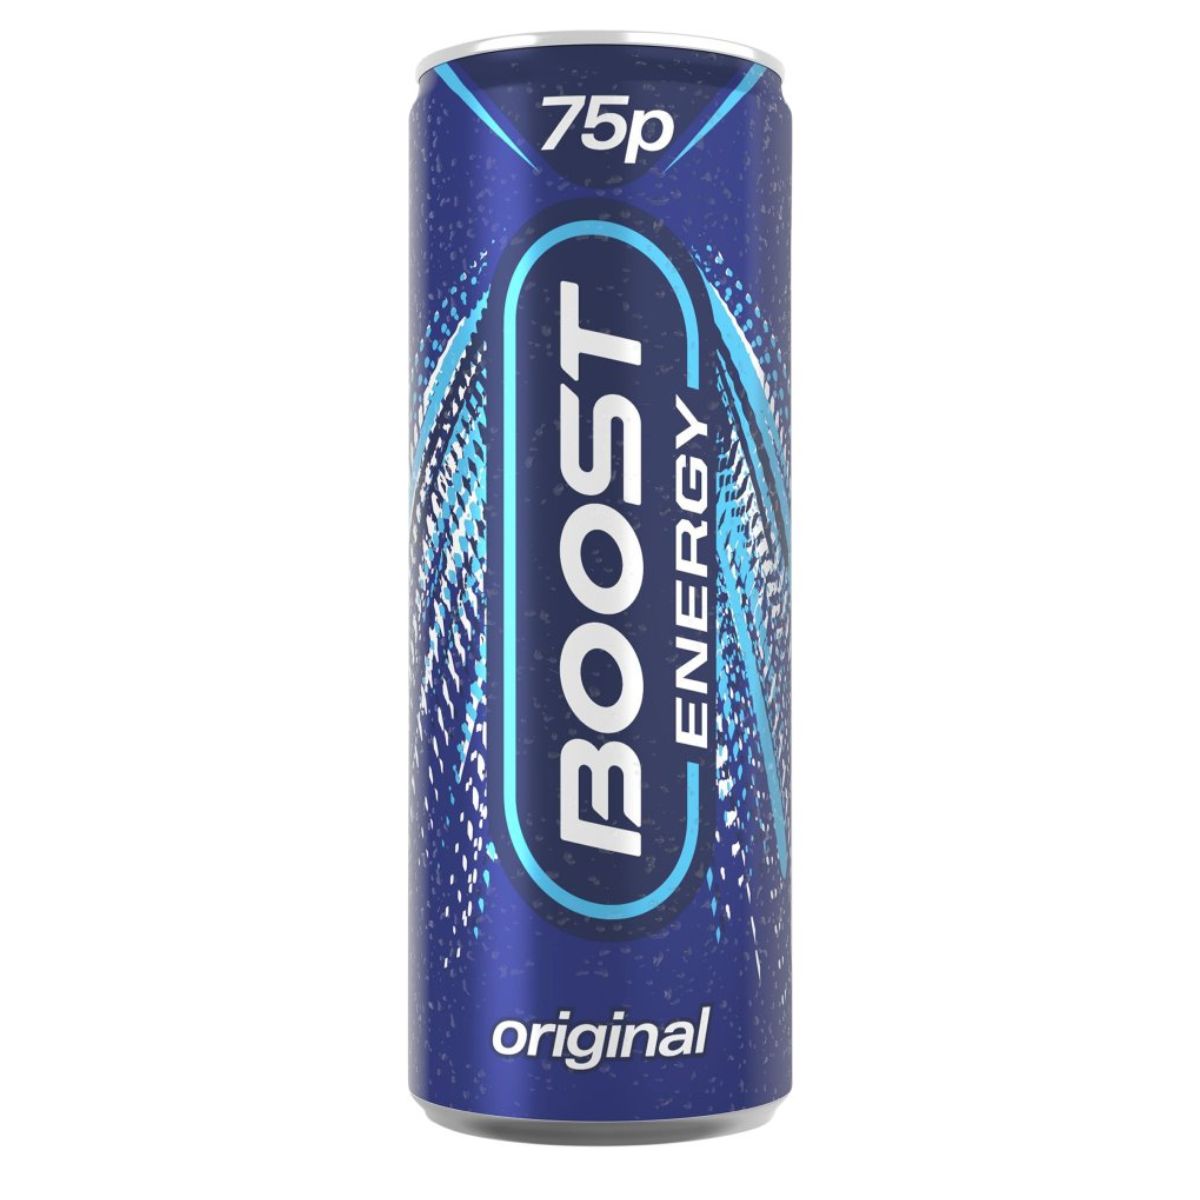 A can of Boost - Energy Original - 250ml on a white background.